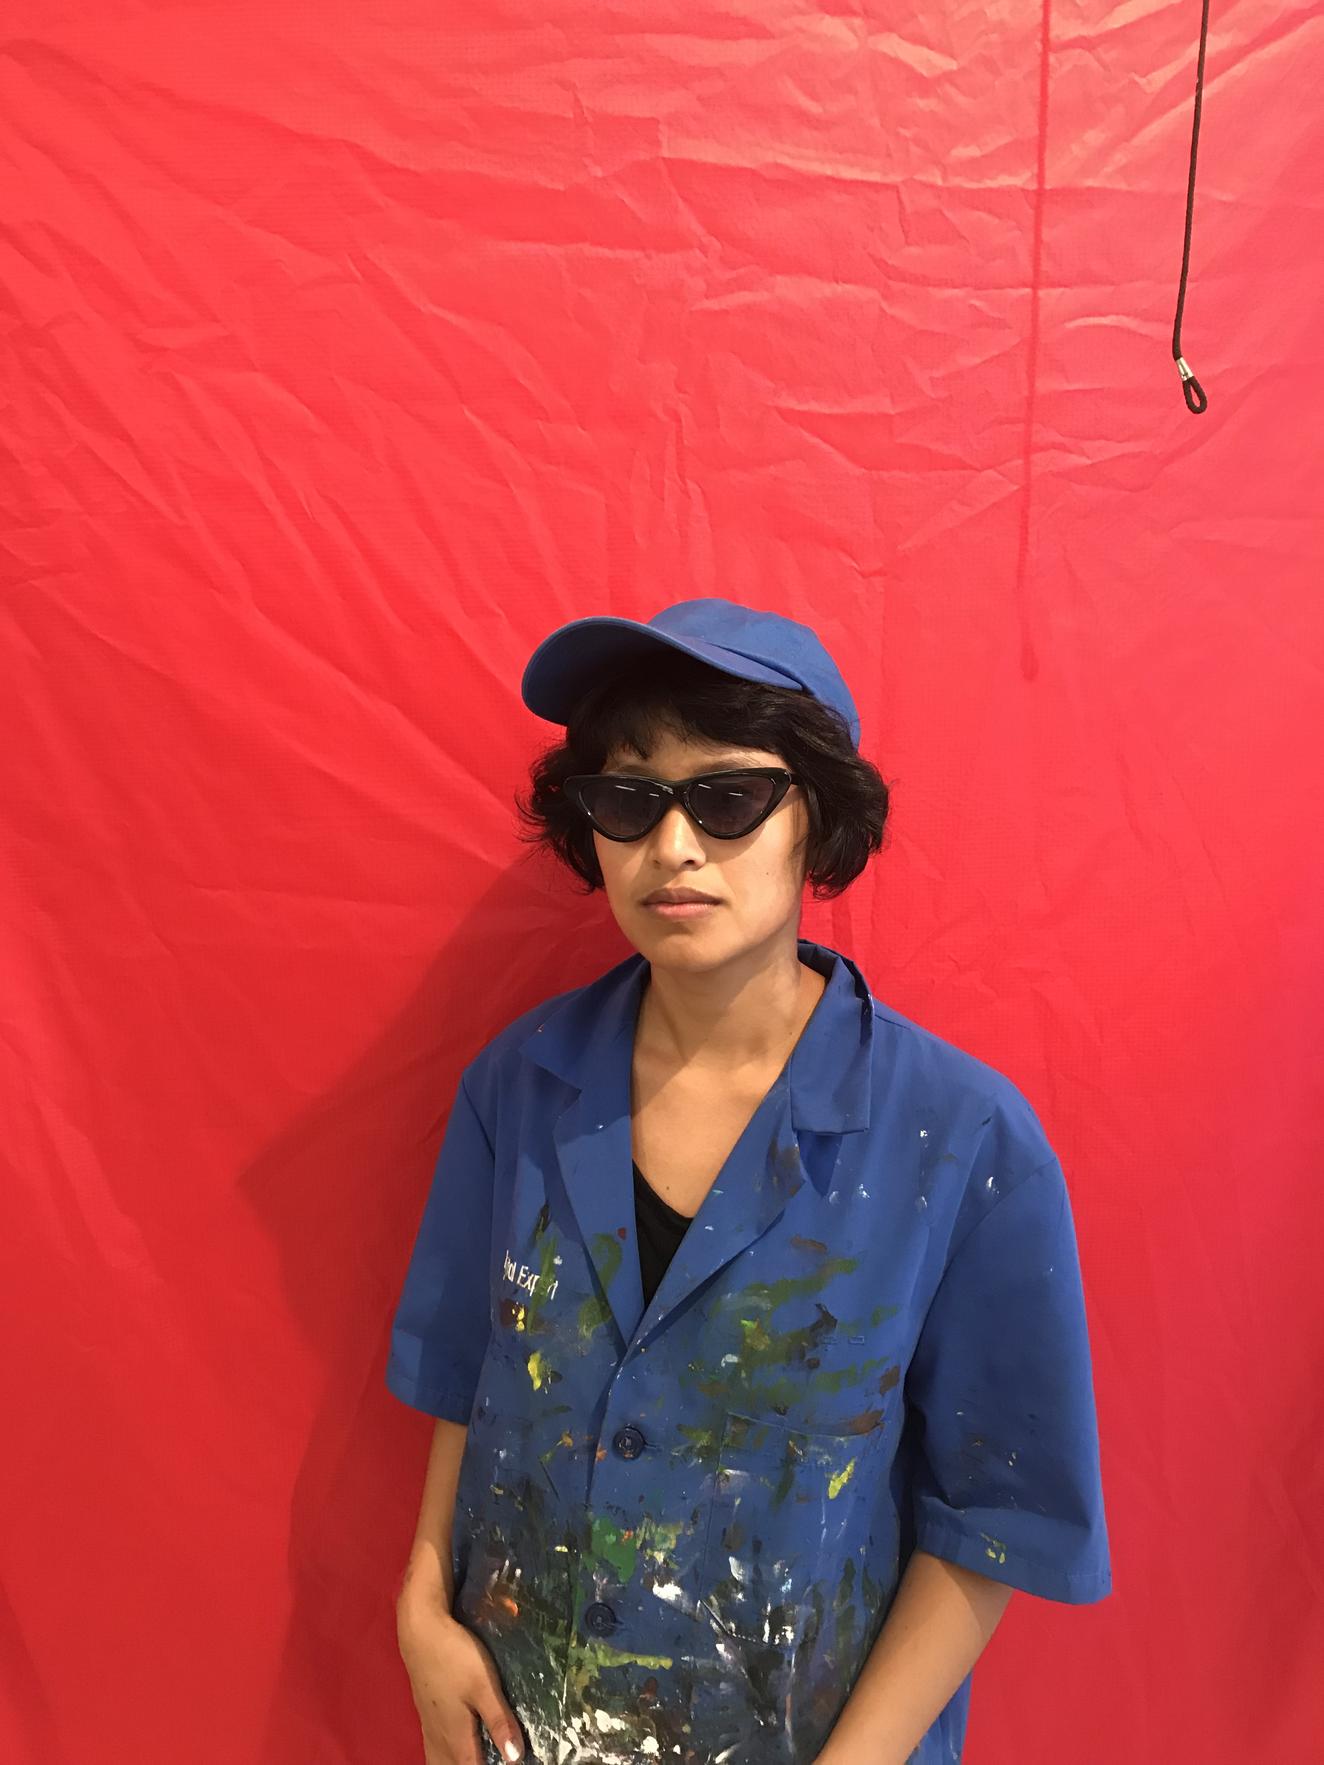 Image of 2019 Artist Fellow Dana Heng. Woman with blue hat and shirt with paint splotches, wearing red sunglasses in front of a red background.